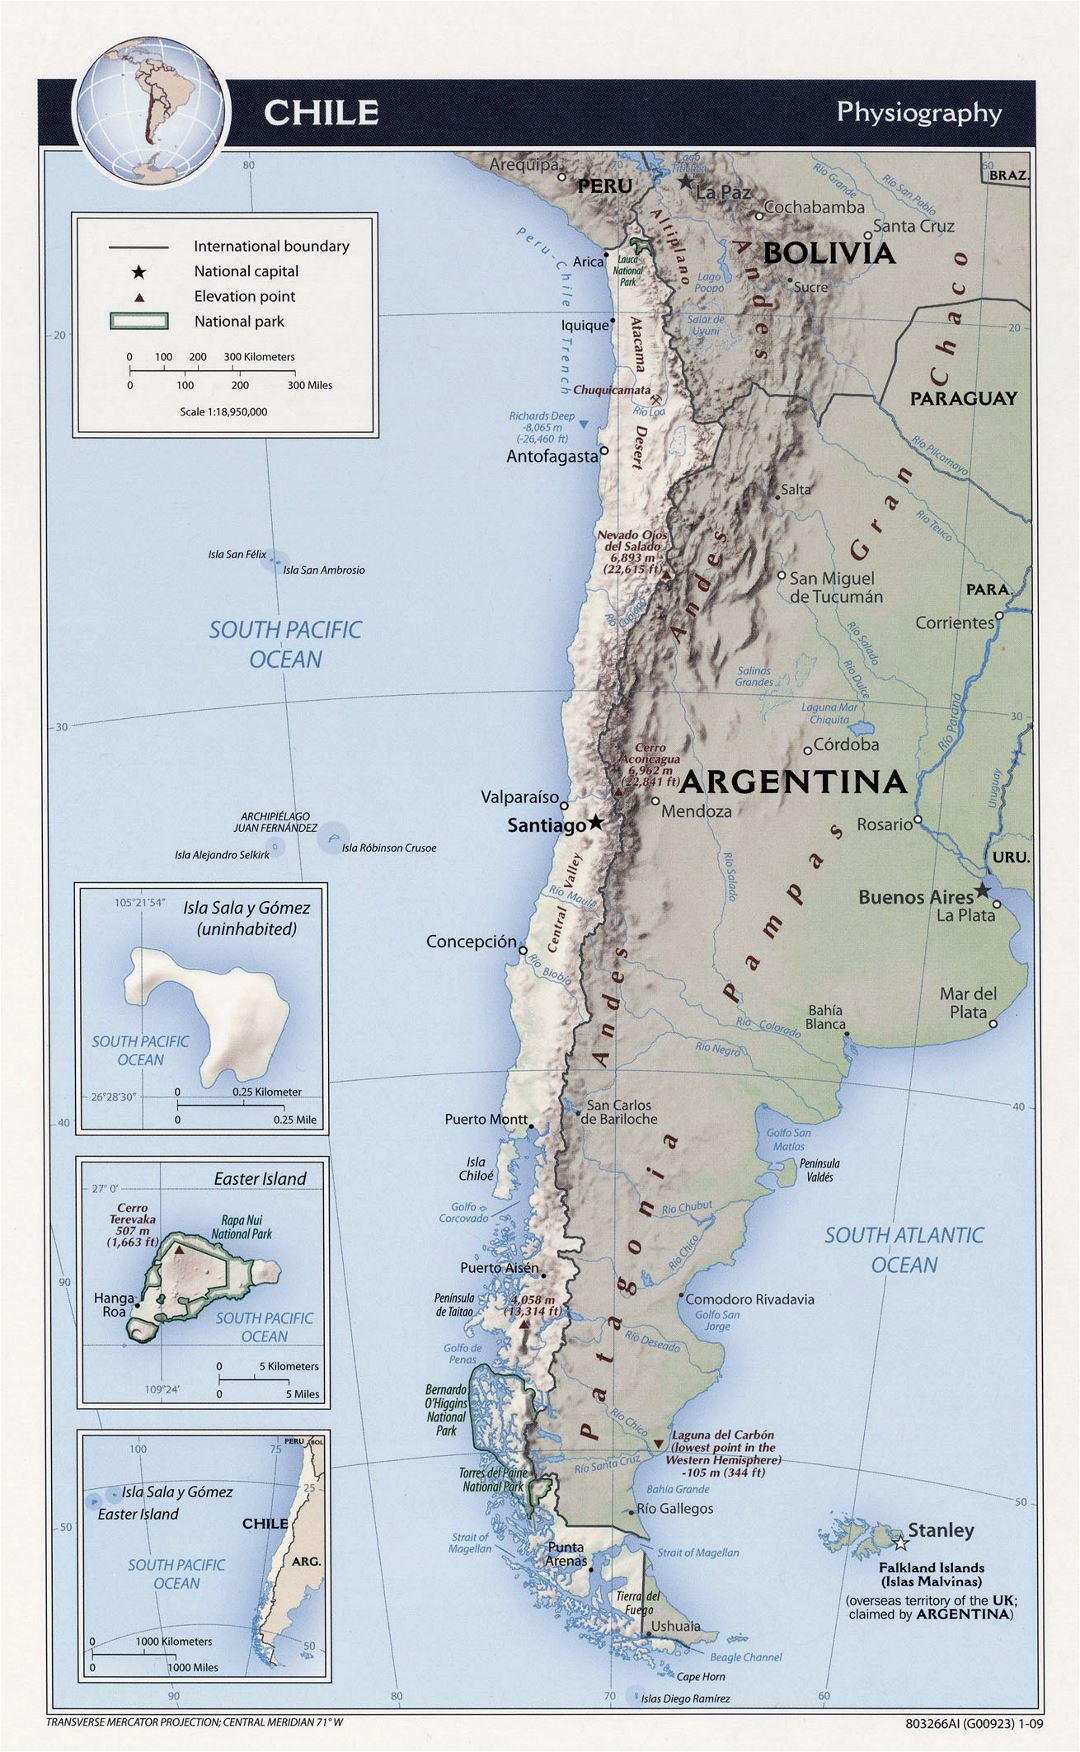 Detailed physiography map of Chile - 2009